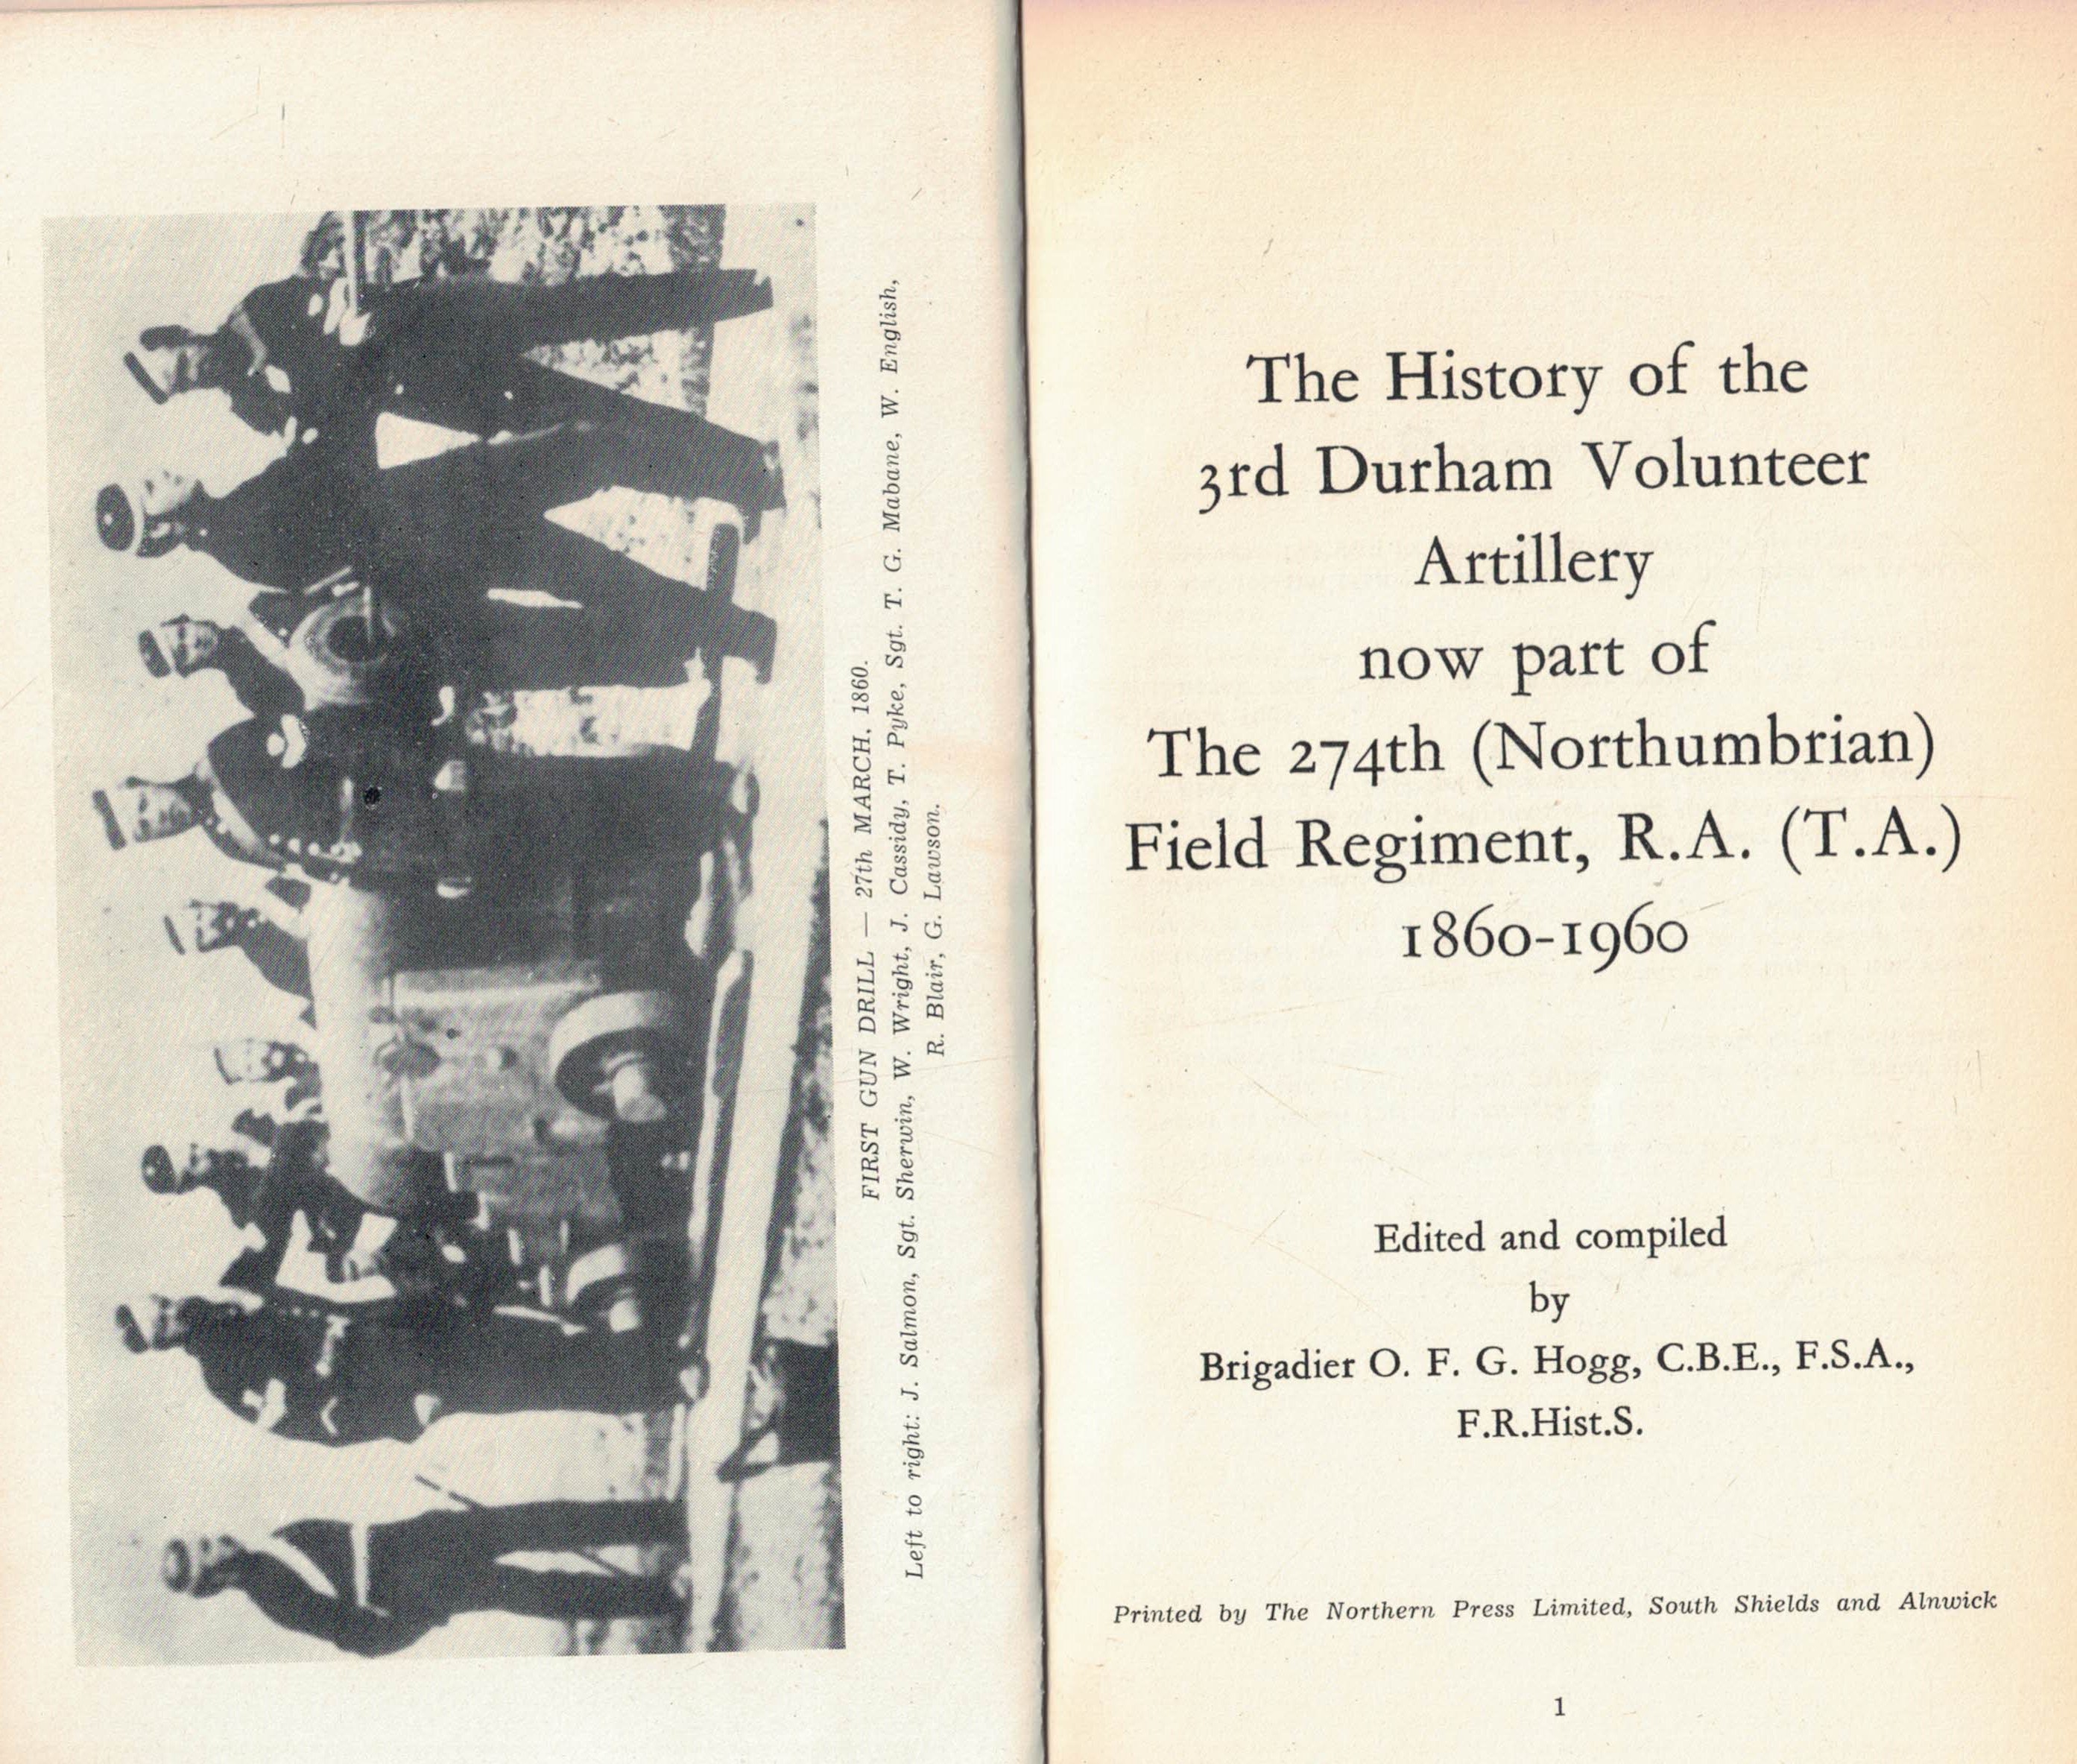 The History of the Third Durham Volunteer Artillery now Part of the 274th (Northumbrian) Field Regiment, R.A. (T.A.) 1860 - 1960